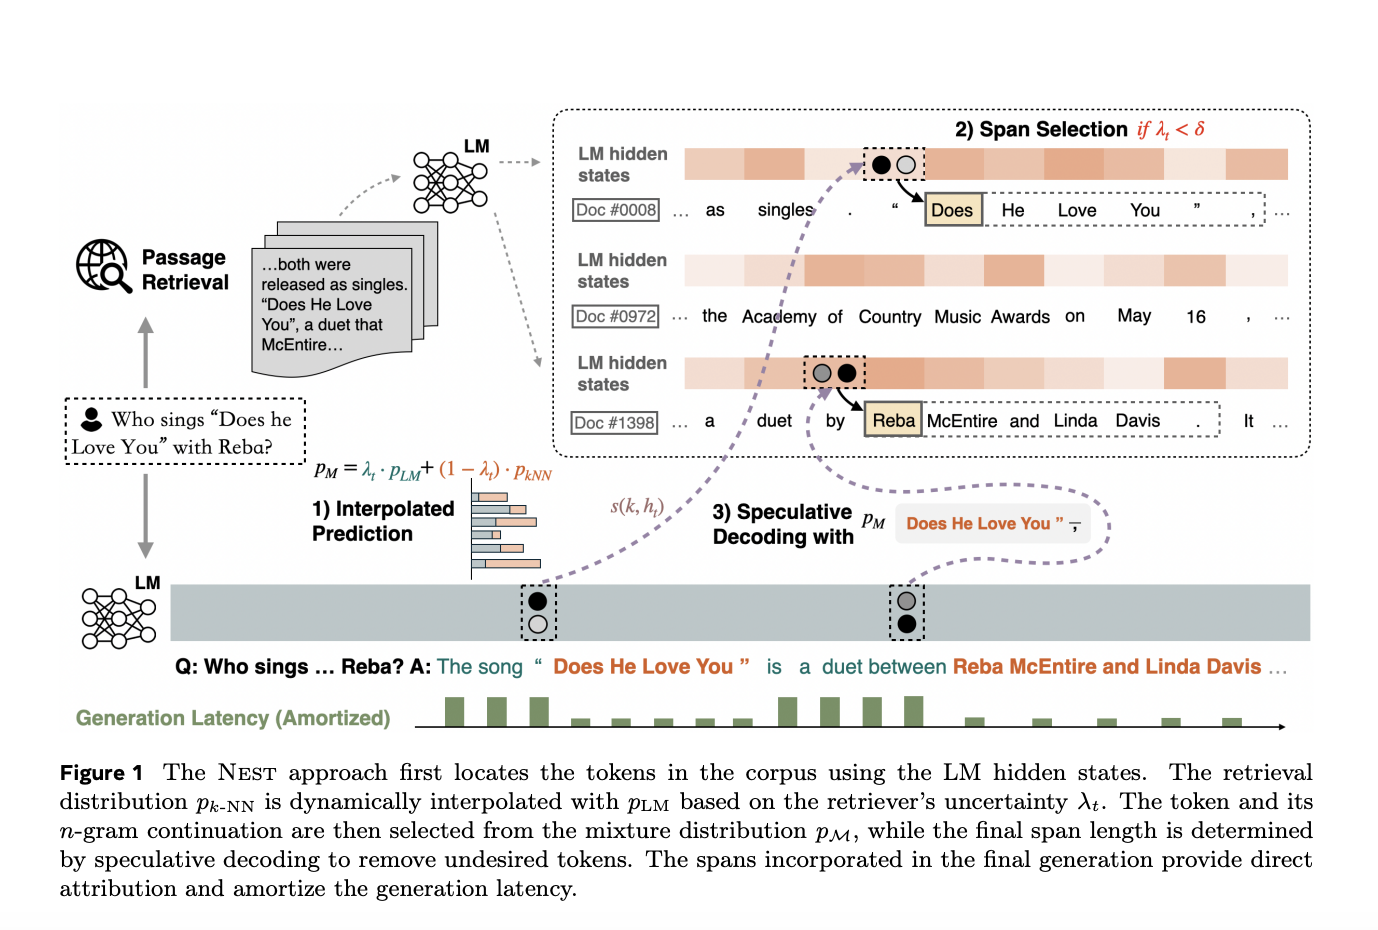  Nearest Neighbor Speculative Decoding (NEST): An Inference-Time Revision Method for Language Models to Enhance Factuality and Attribution Using Nearest-Neighbor Speculative Decoding